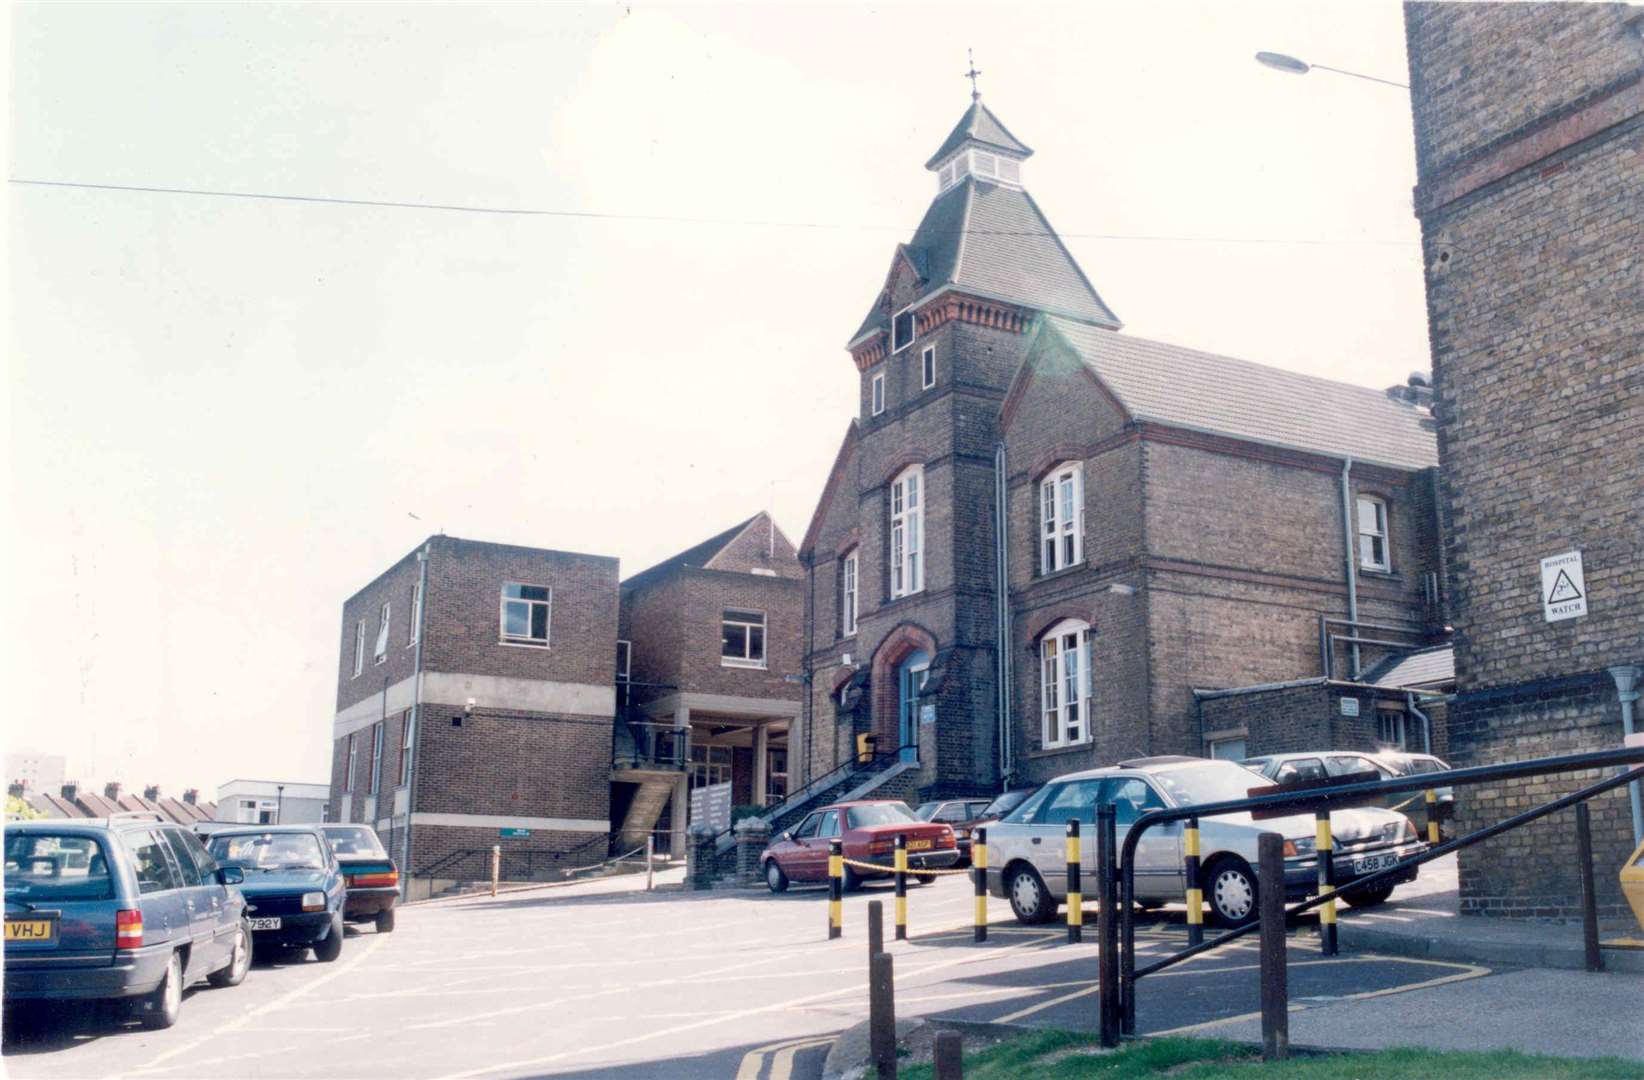 A 1993 picture of All Saint's Hospital in Magpie Hall Road, Chatham